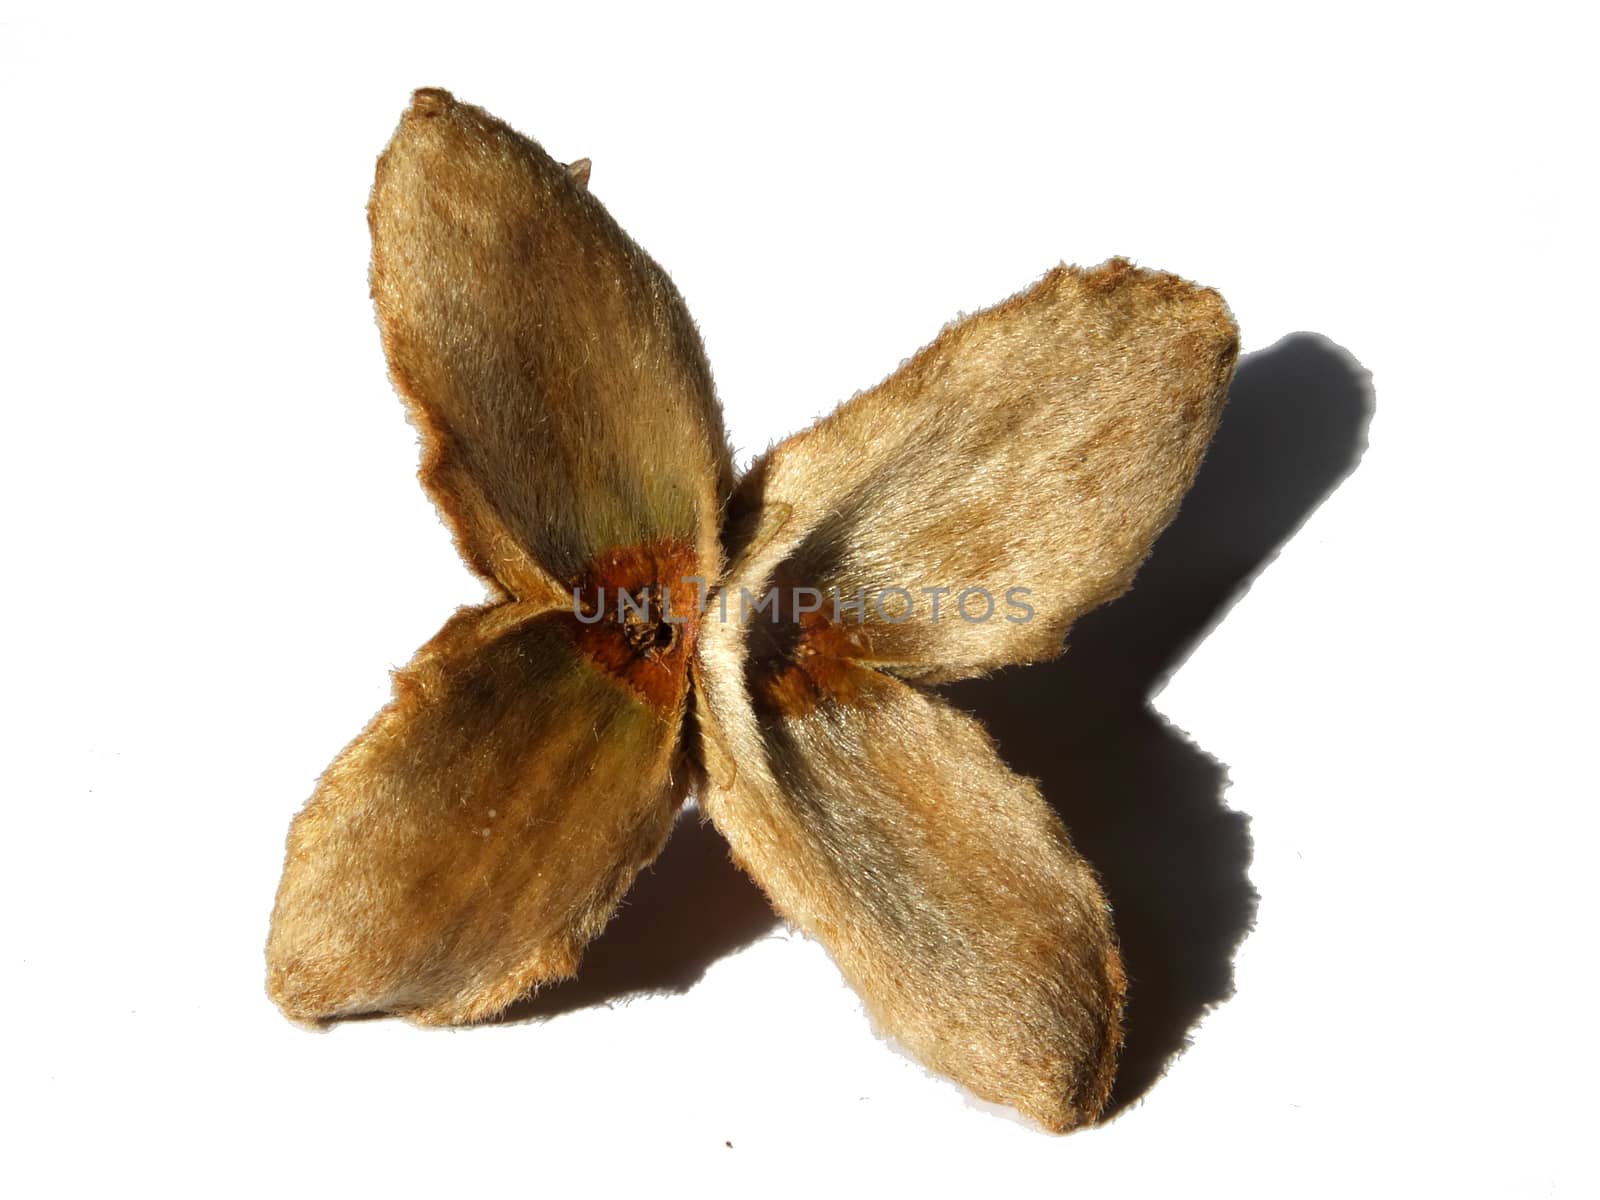 an open beech nut husk on a white background with shadow by philopenshaw